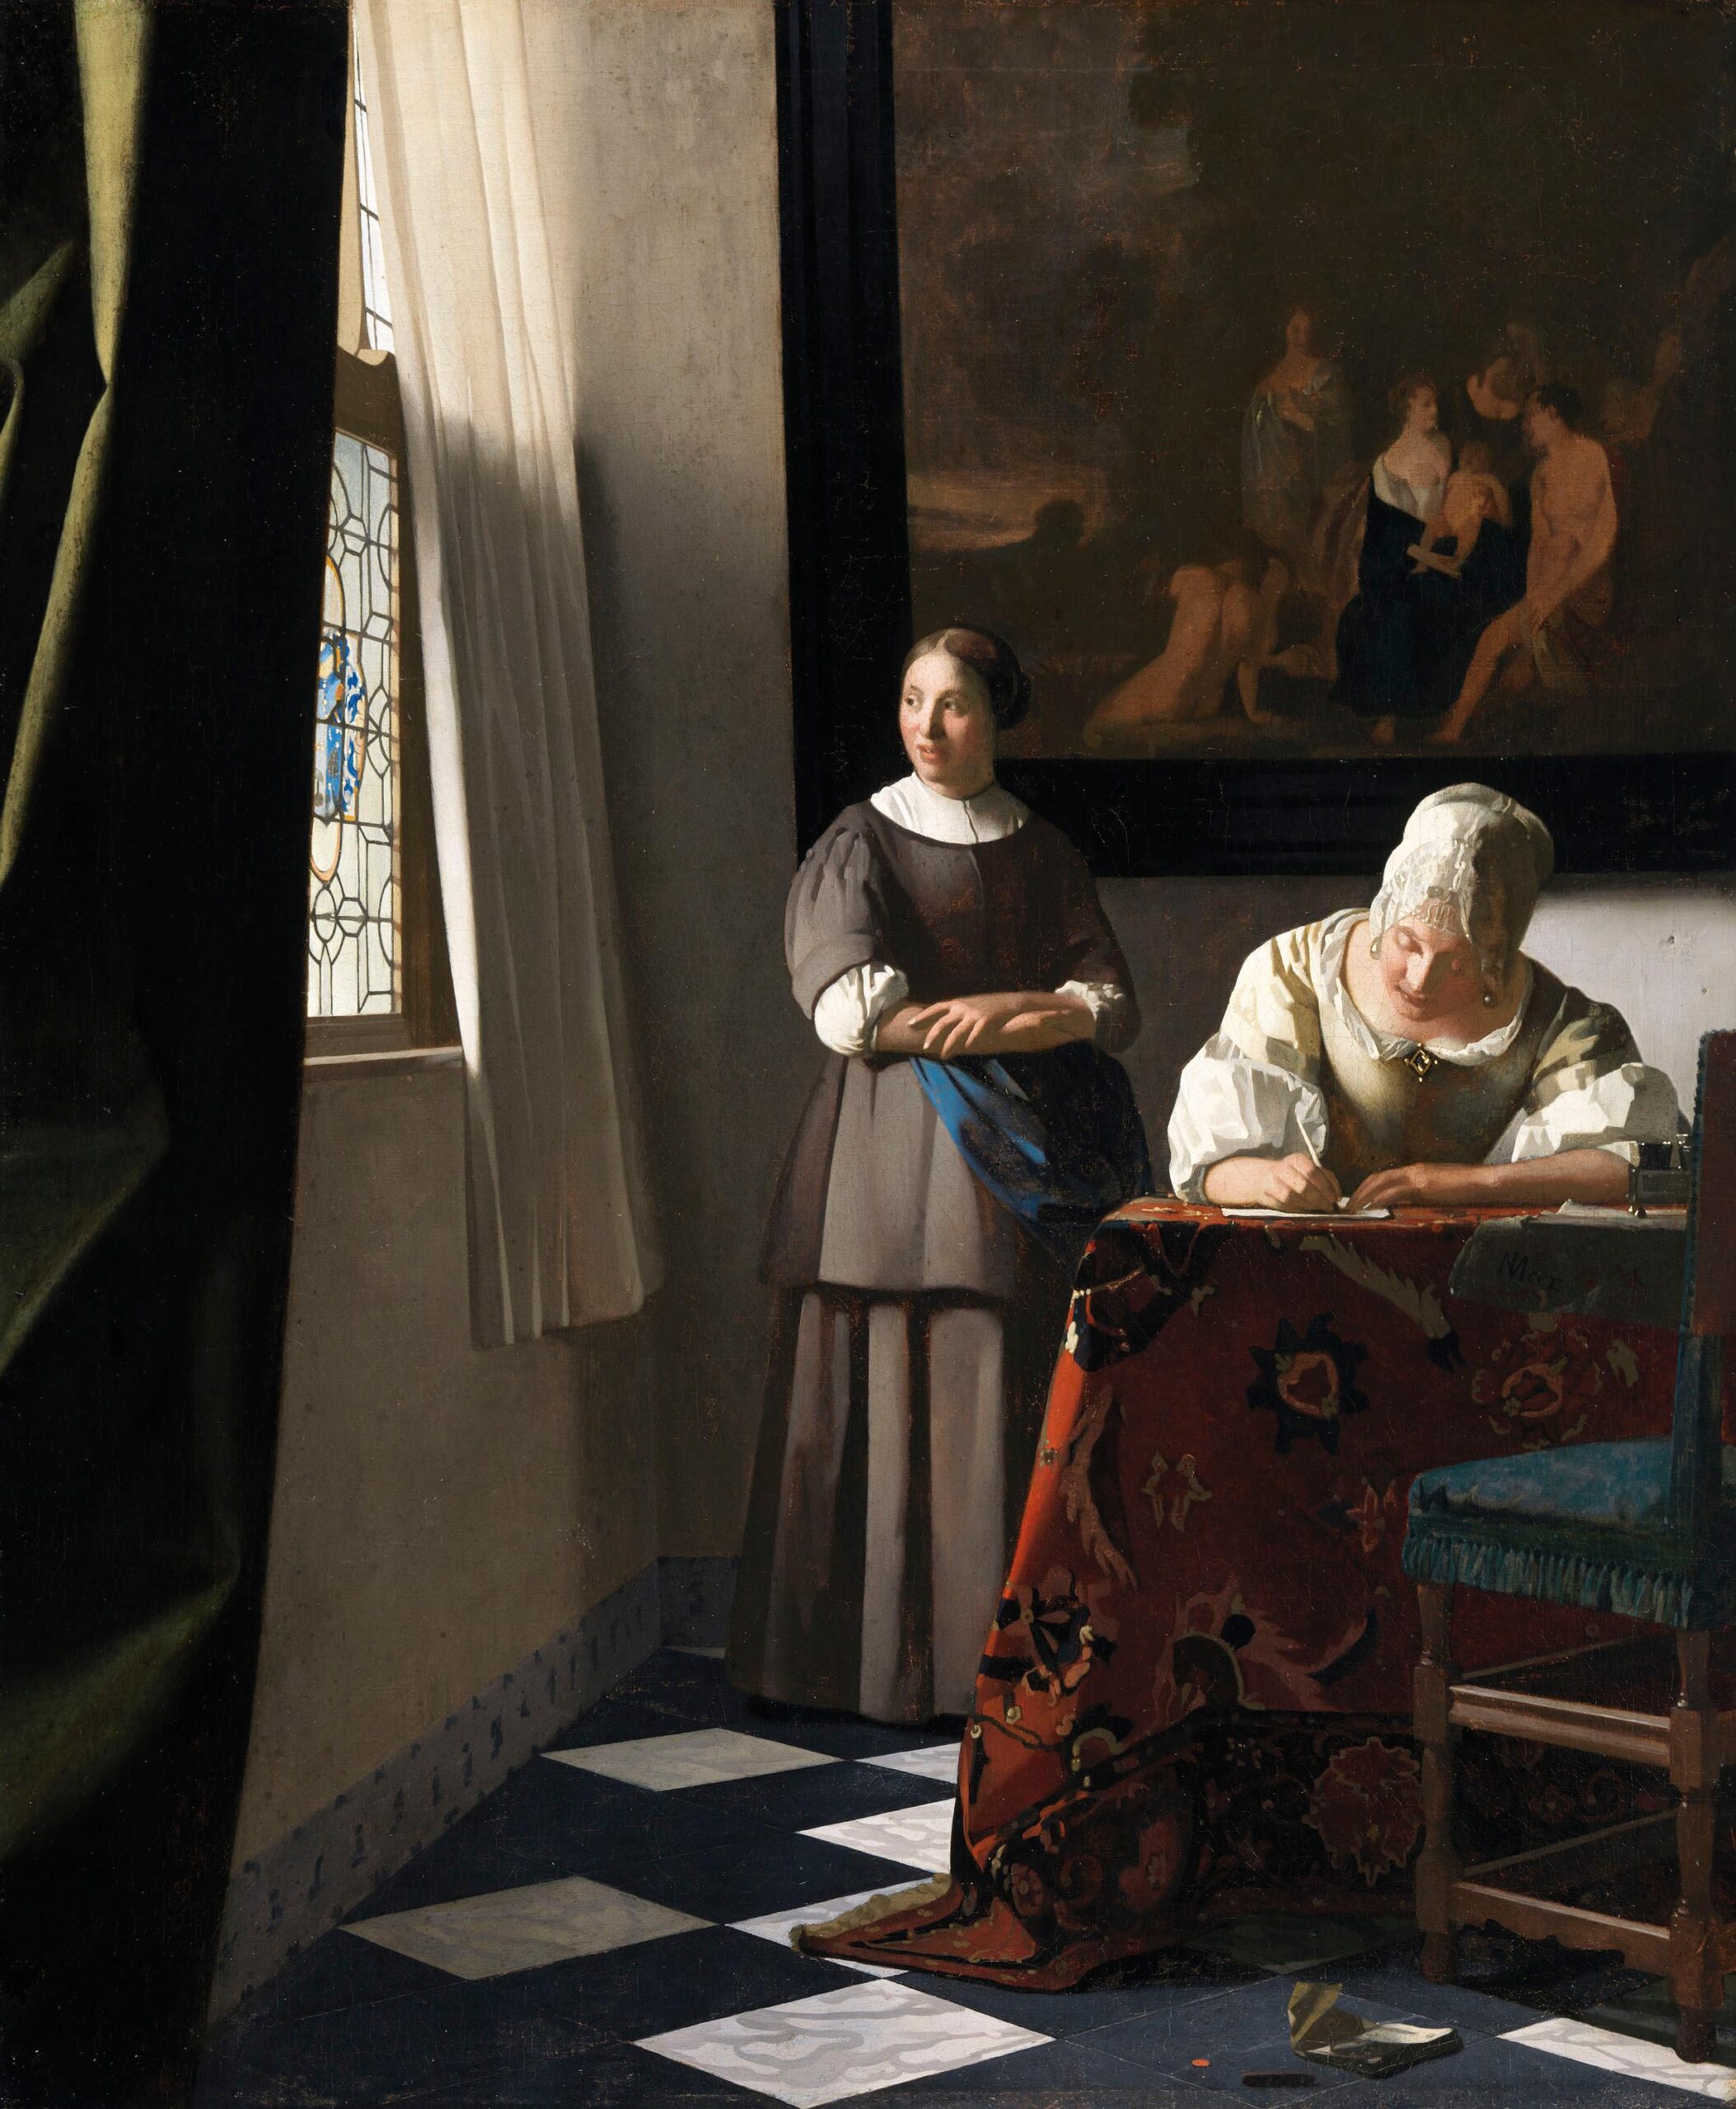 Johannes Vermeer, Lady Writing a Letter with her Maid, c. 1670–71, oil on canvas, 71.1 x 60.5 cm, National Gallery of Ireland, Dublin